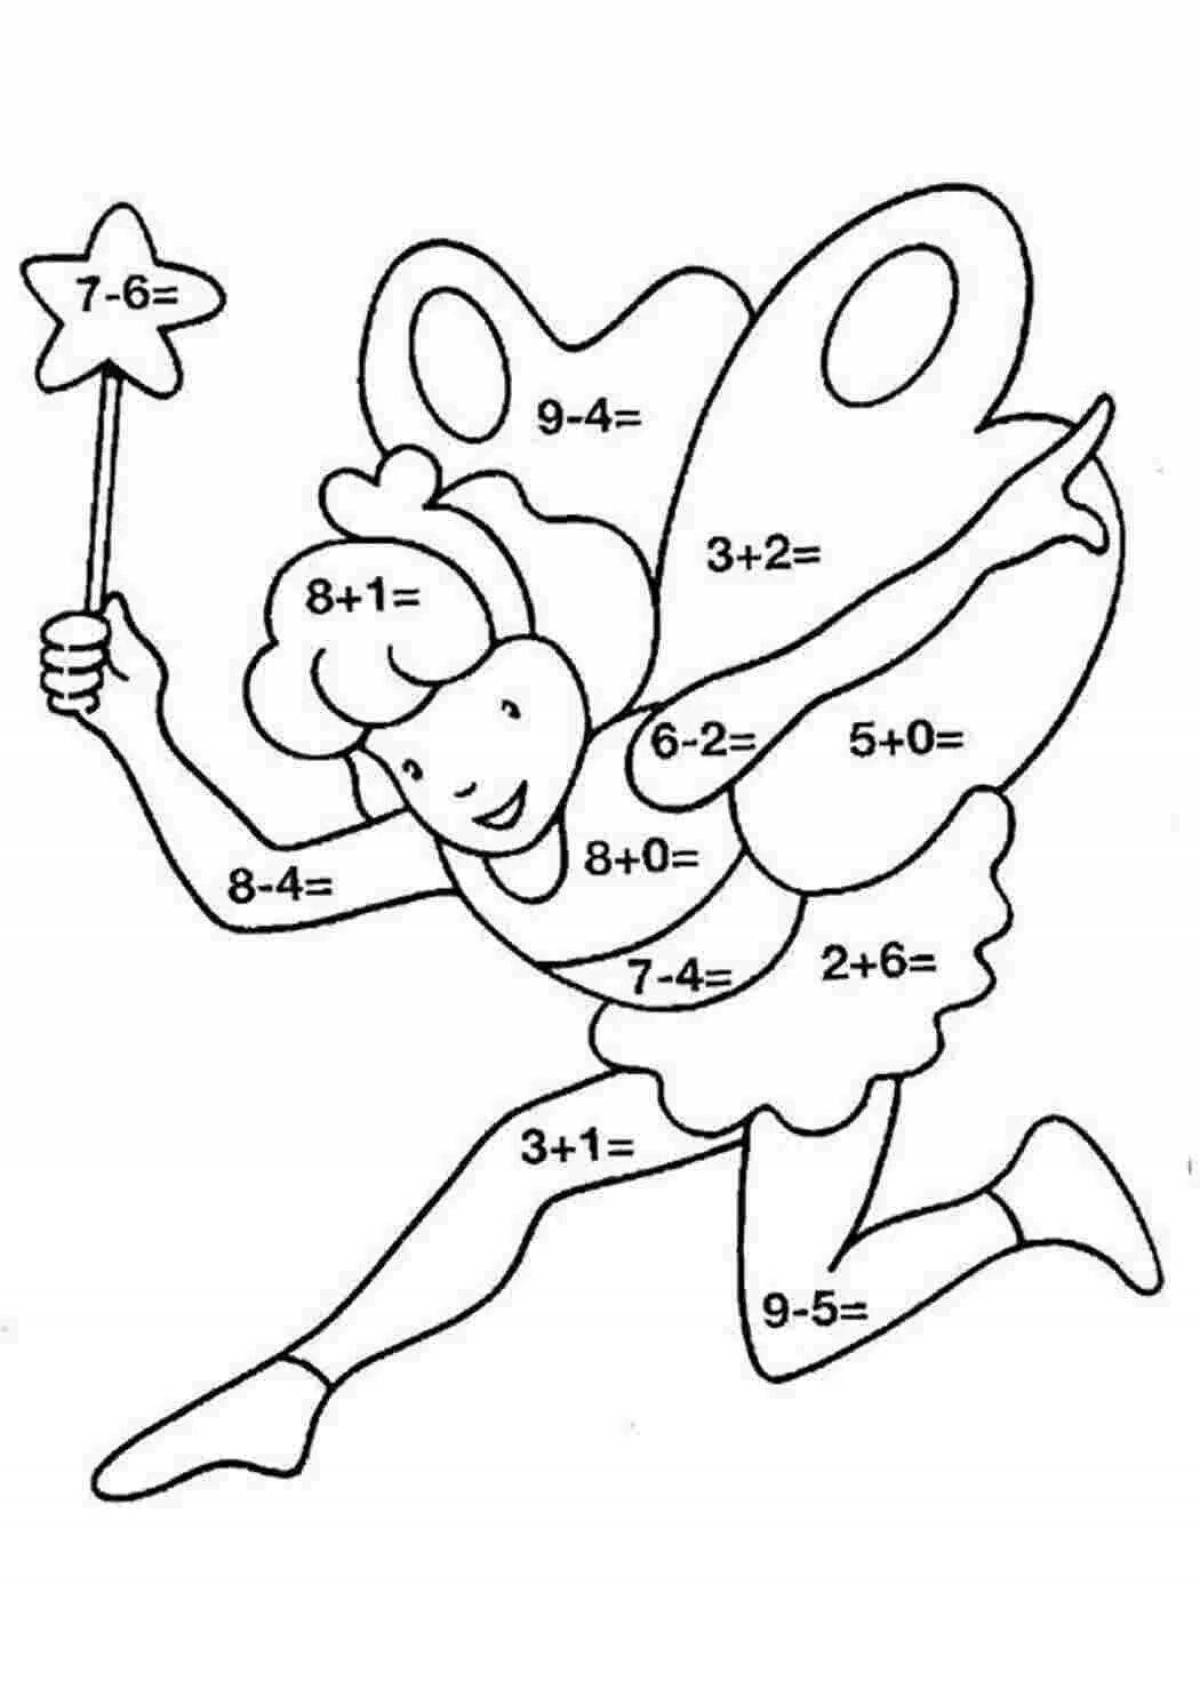 Fun Calculations coloring page